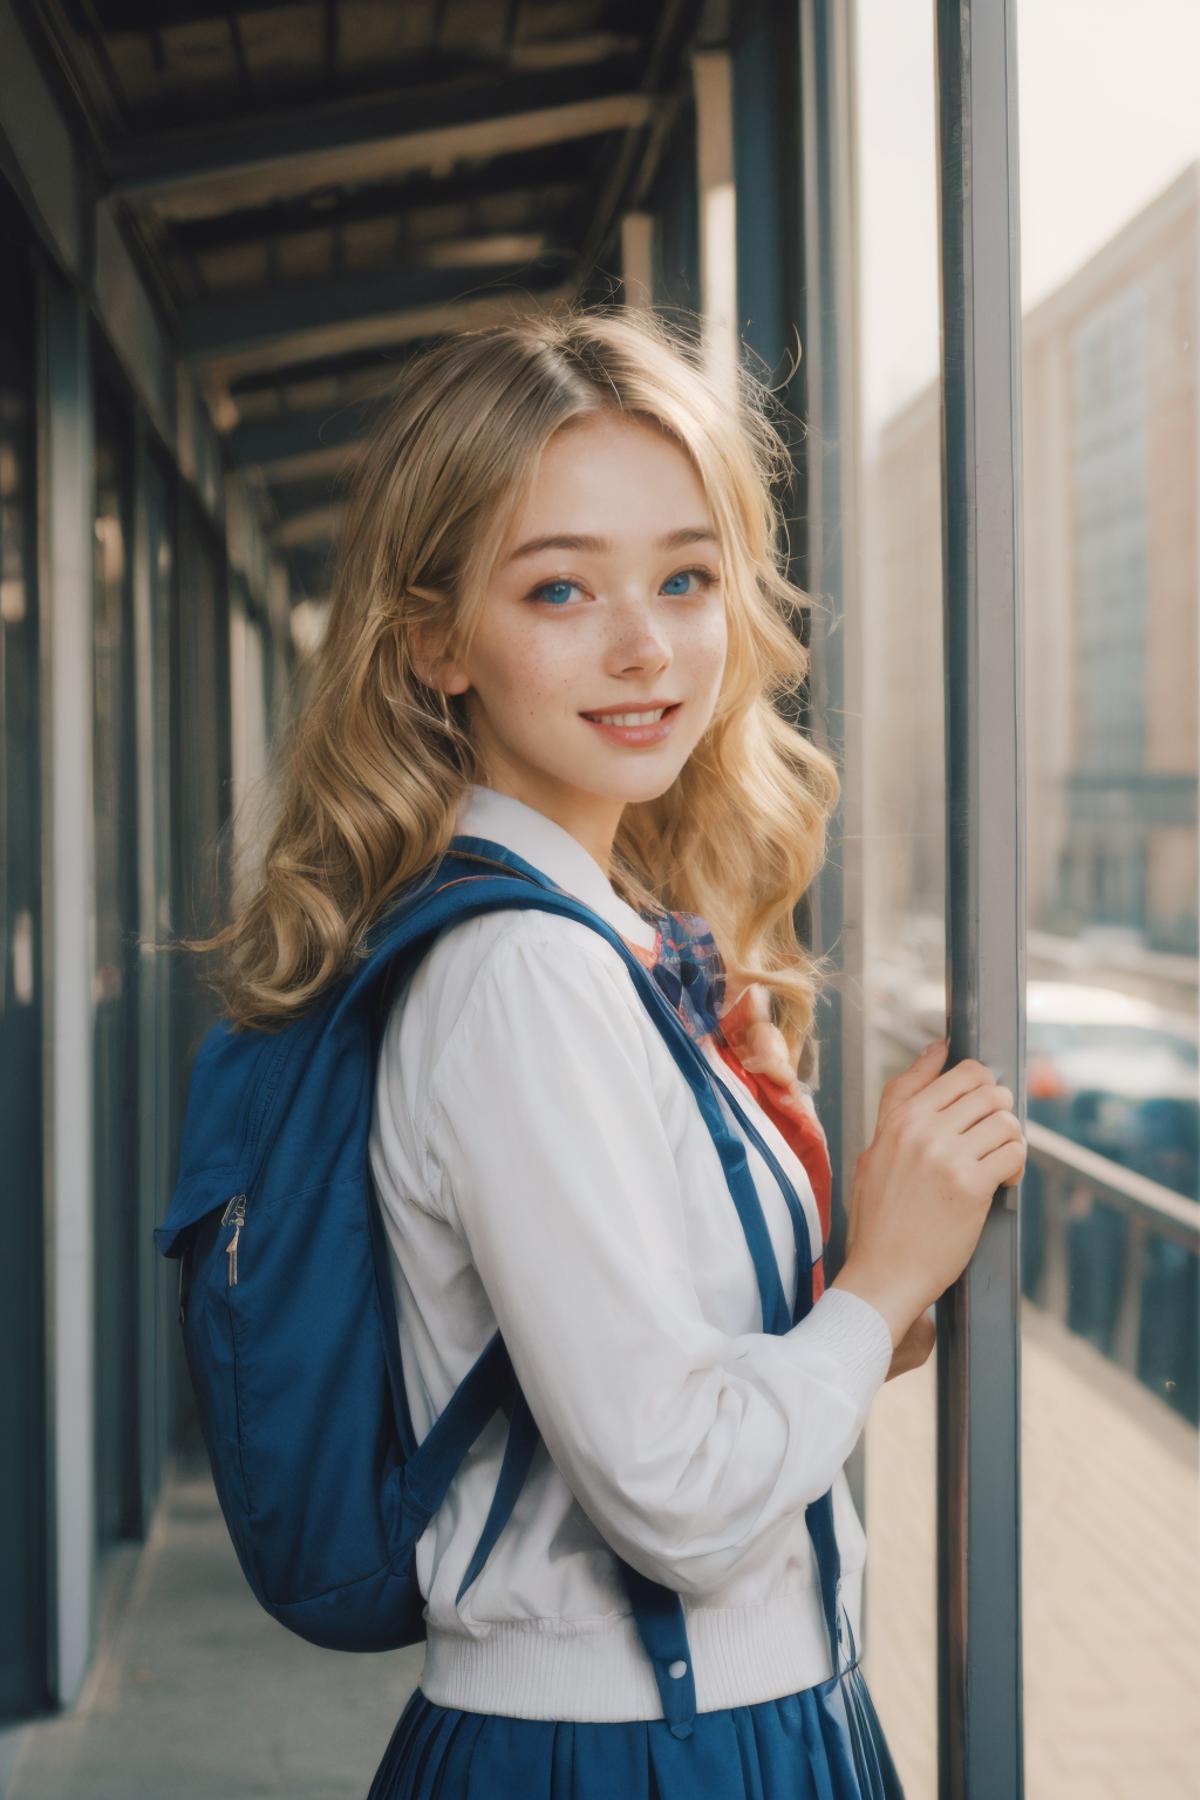 A smiling blonde woman wearing a blue backpack and red tie.